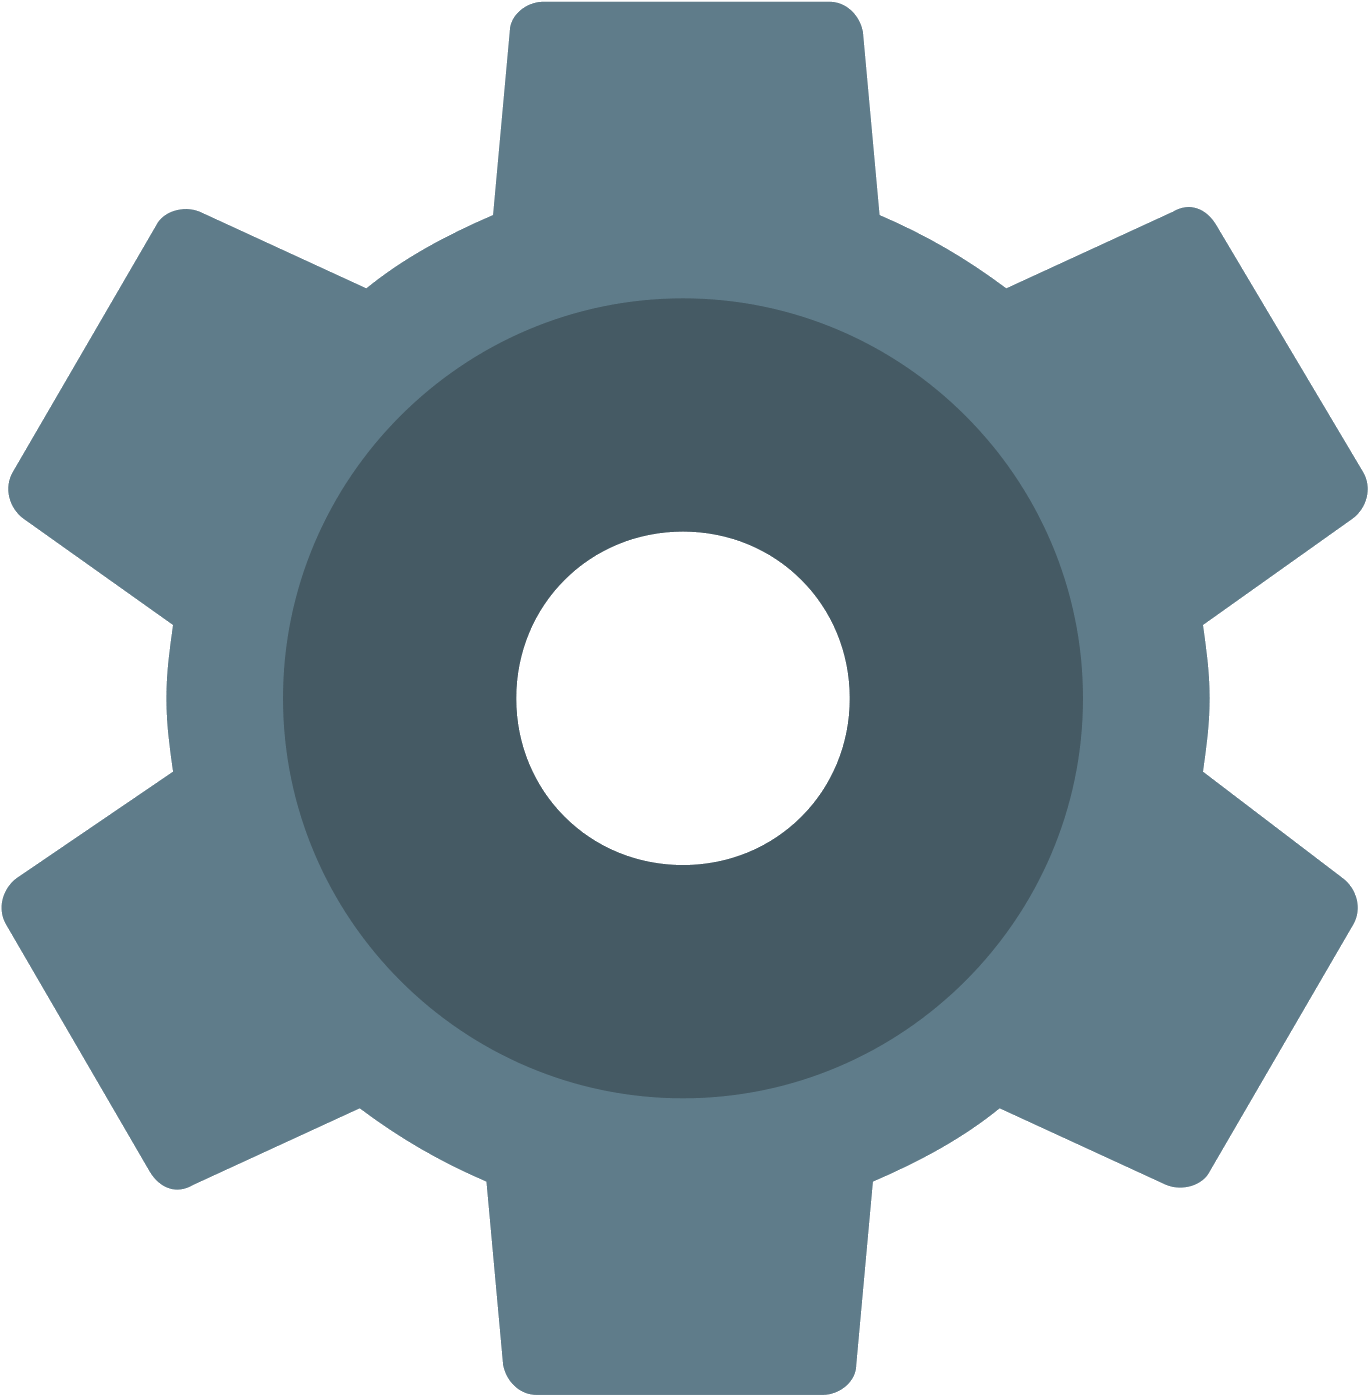 A Grey Gear With A Black Center